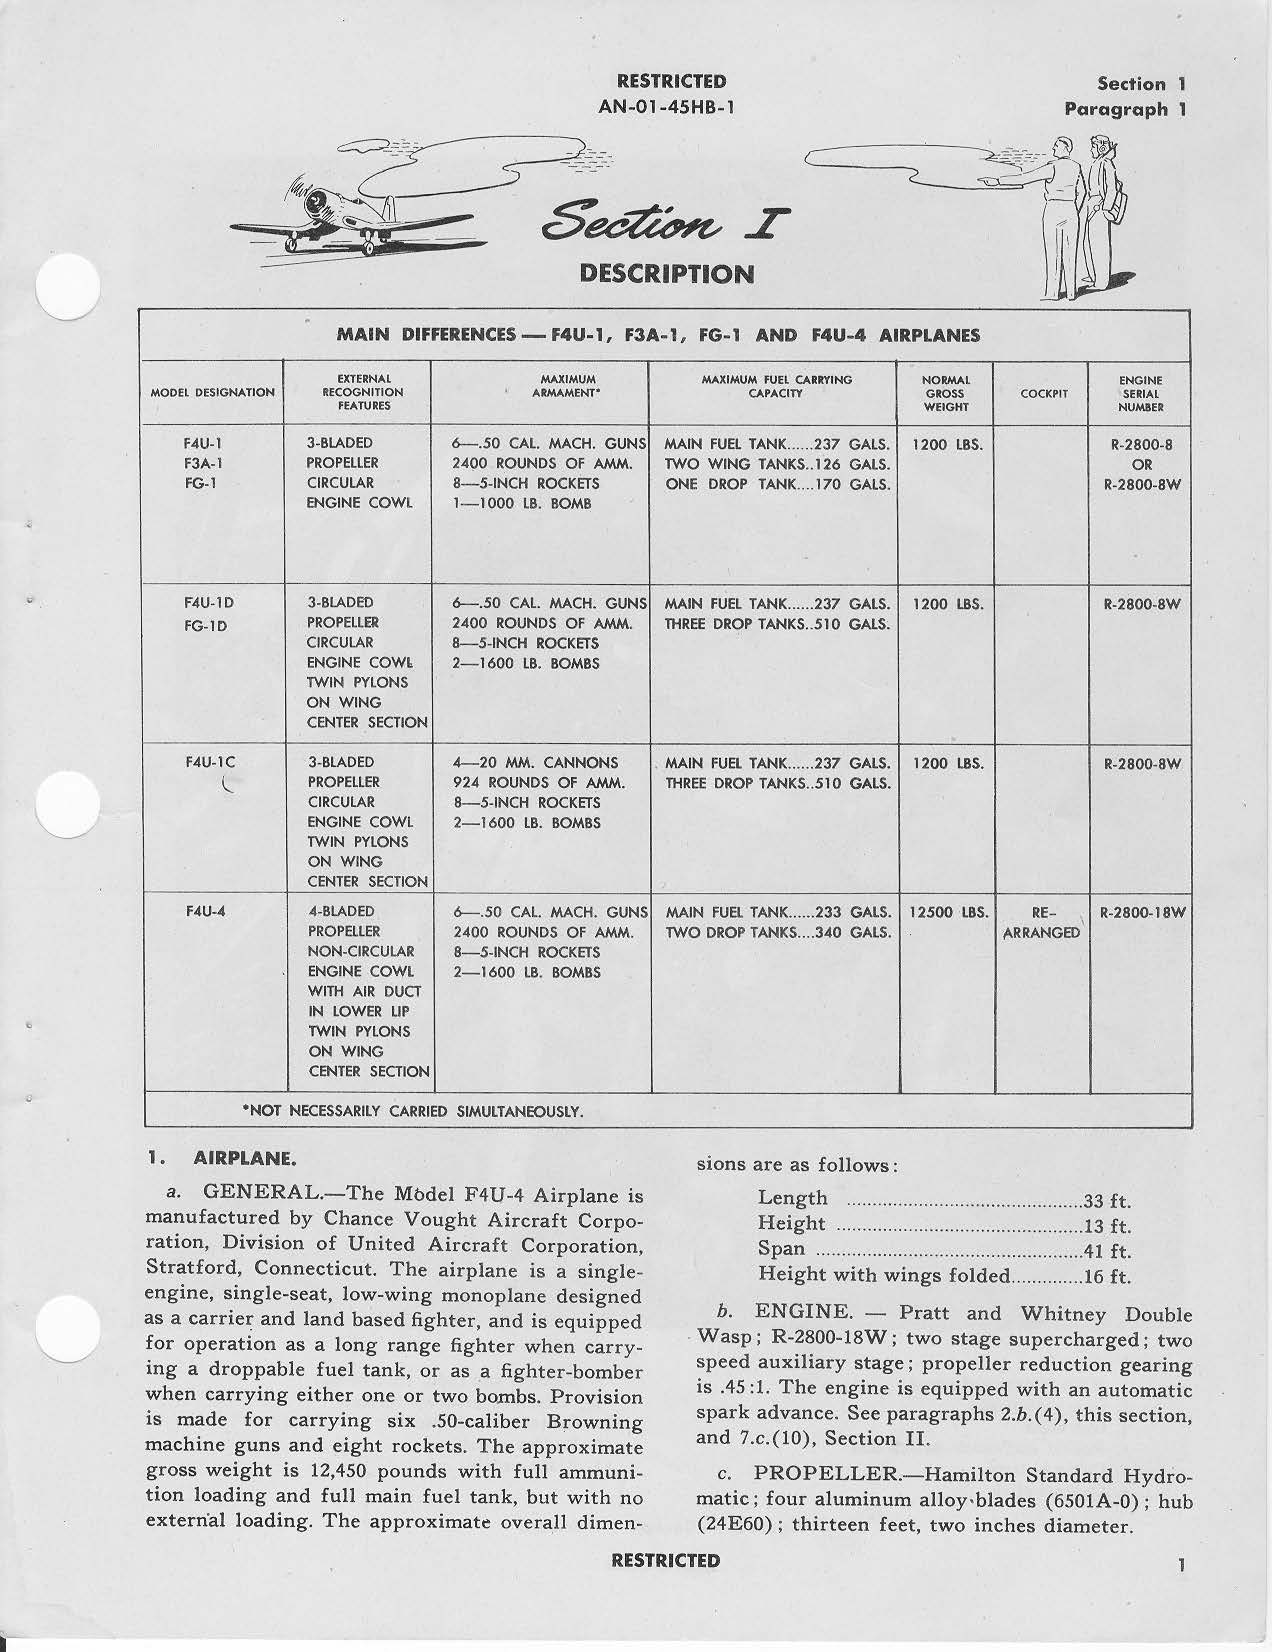 Sample page 9 from AirCorps Library document: Pilots Handbook of Flight Operating Instructions for F4U-4